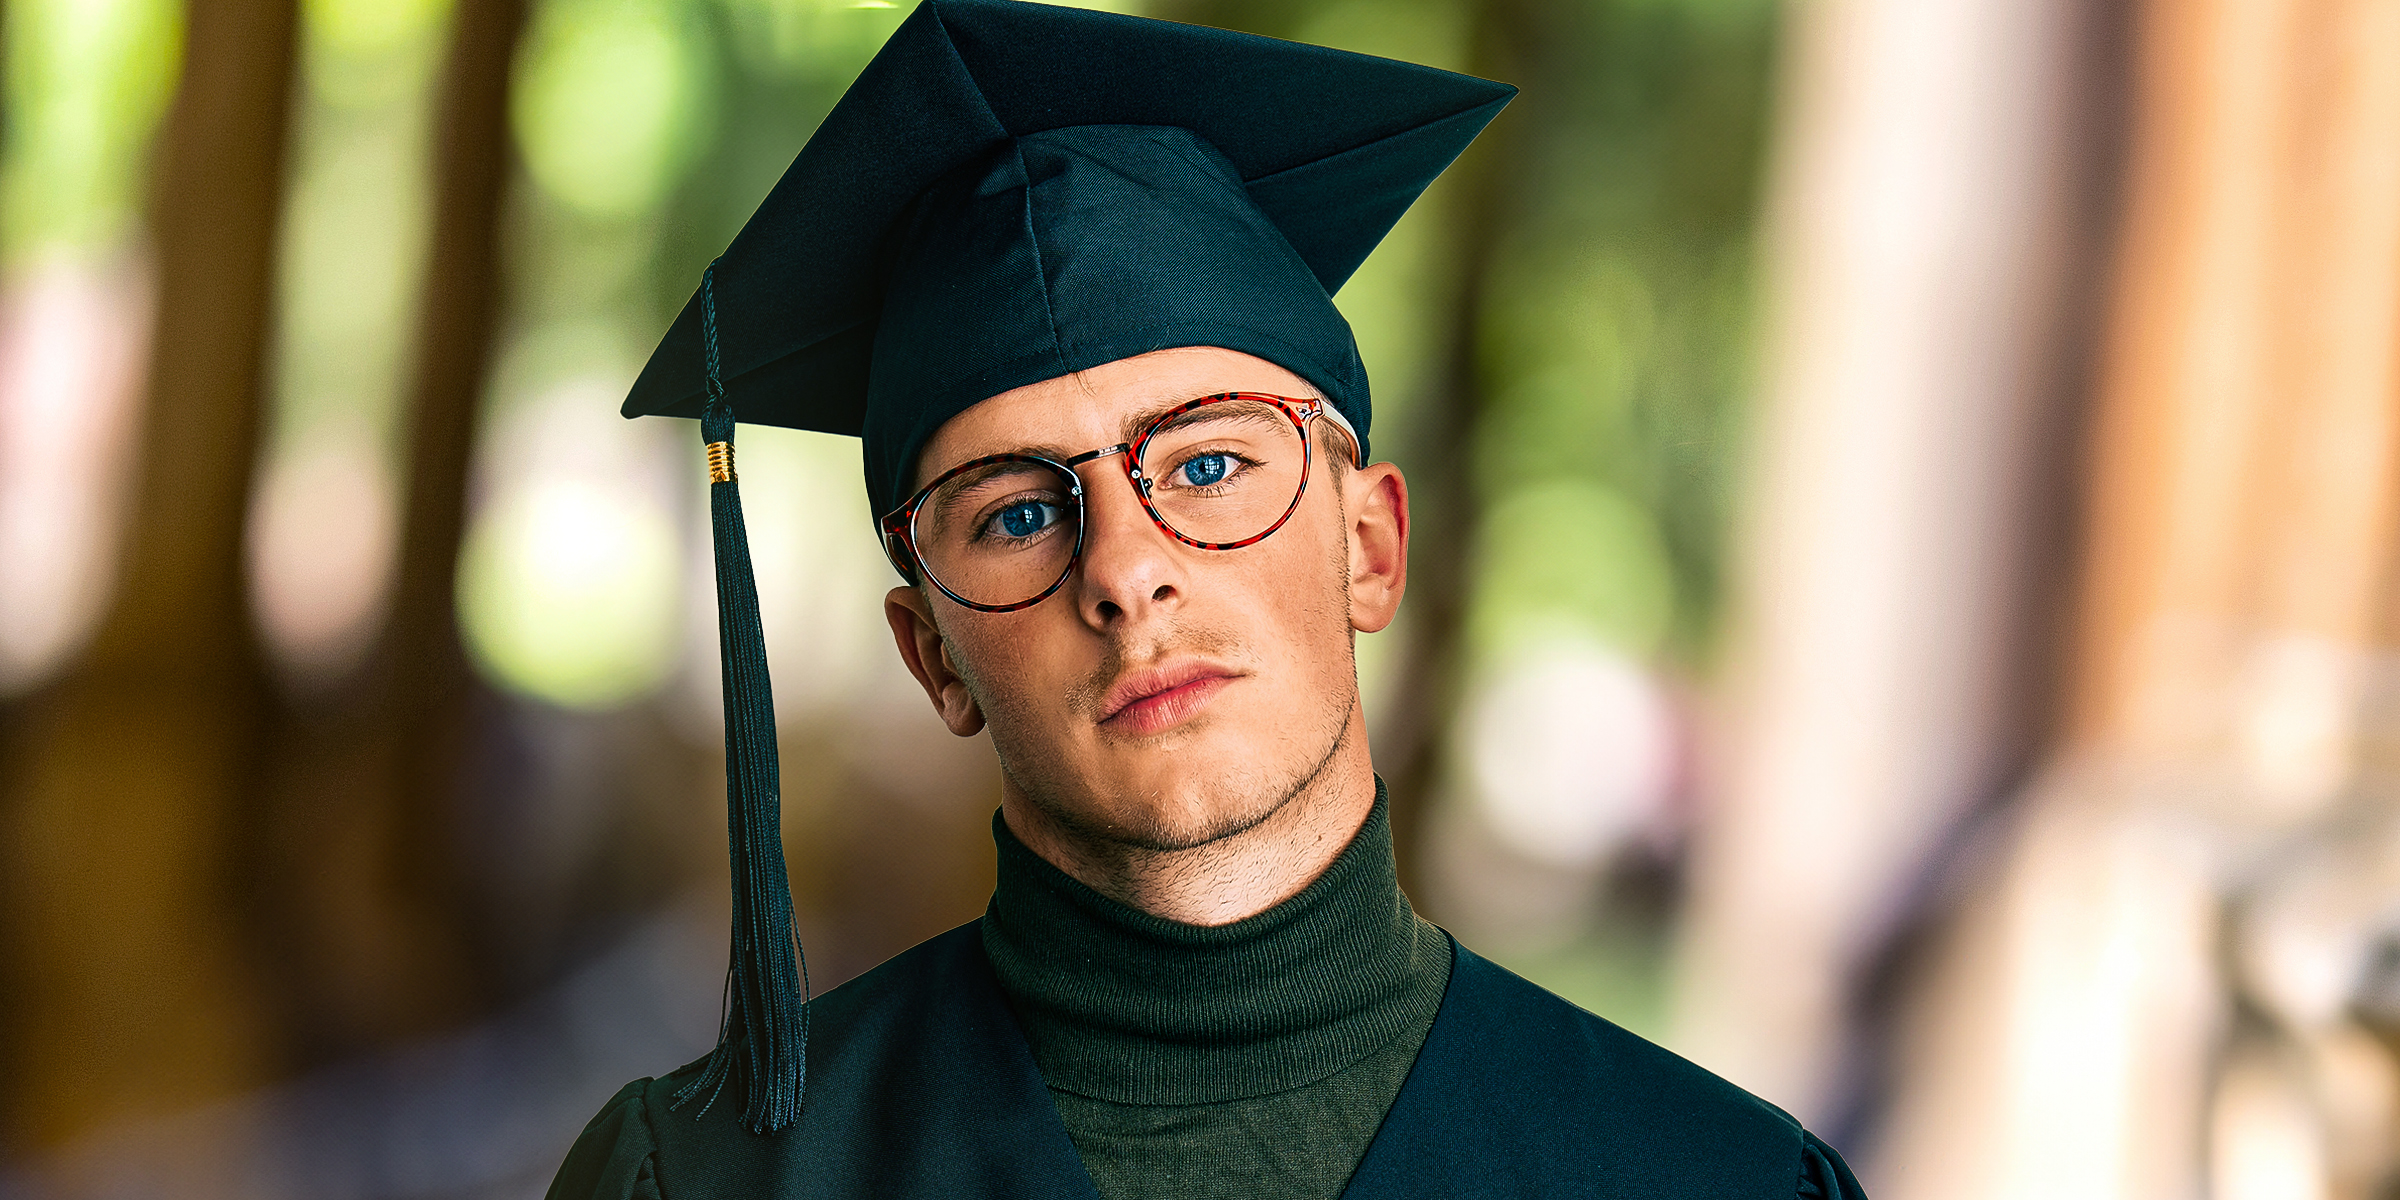 A boy in his graduation outfit | Source: Shutterstock